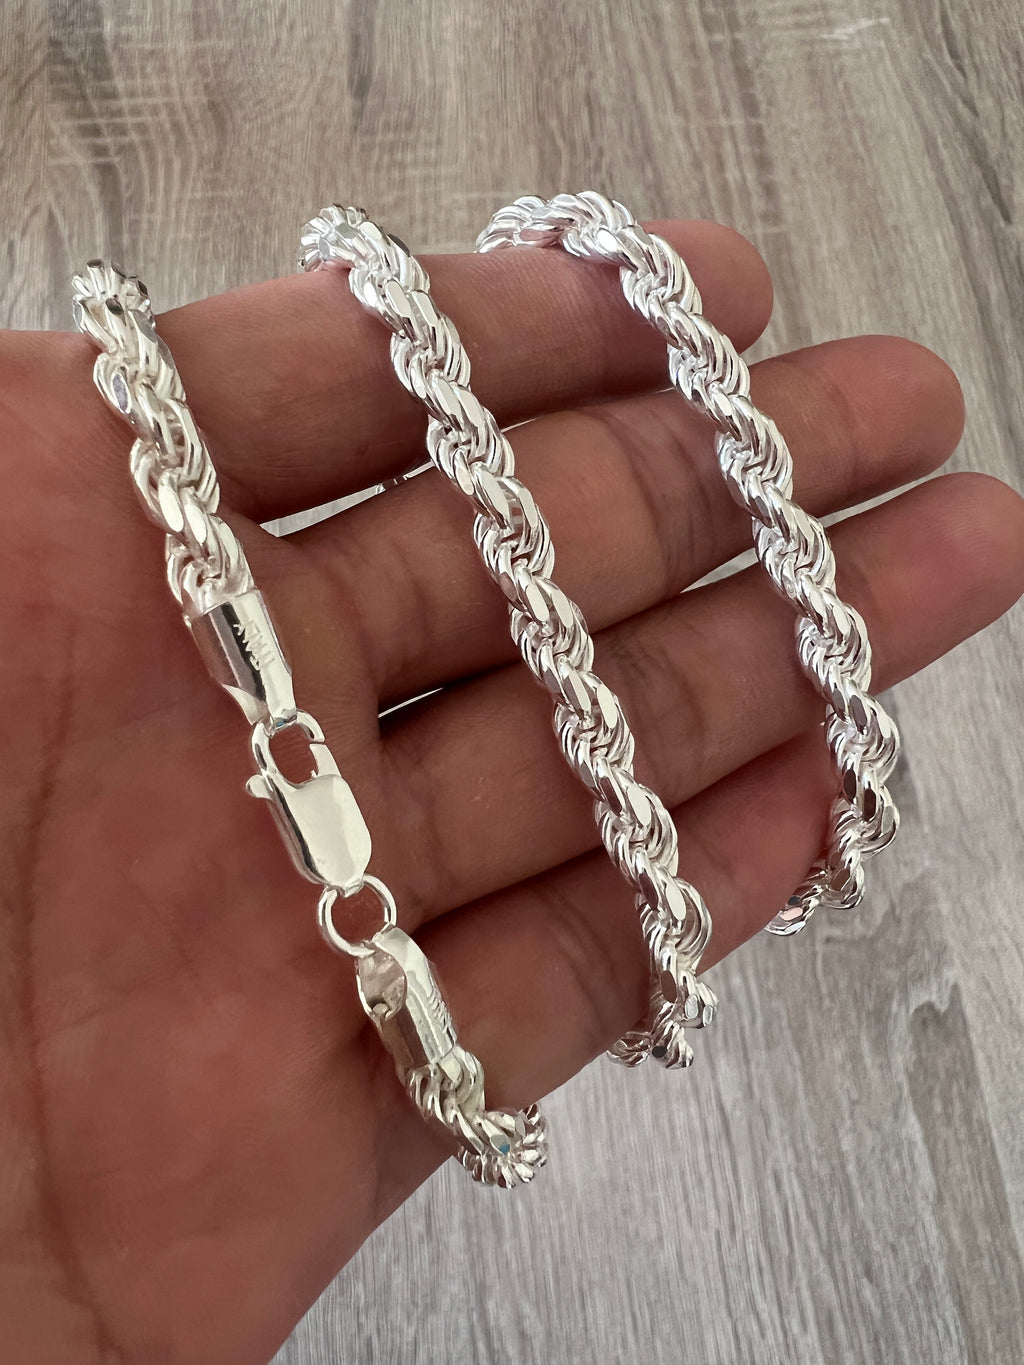 3mm Sterling Silver Solid Flat Rope Chain Necklace, 18 Inch 